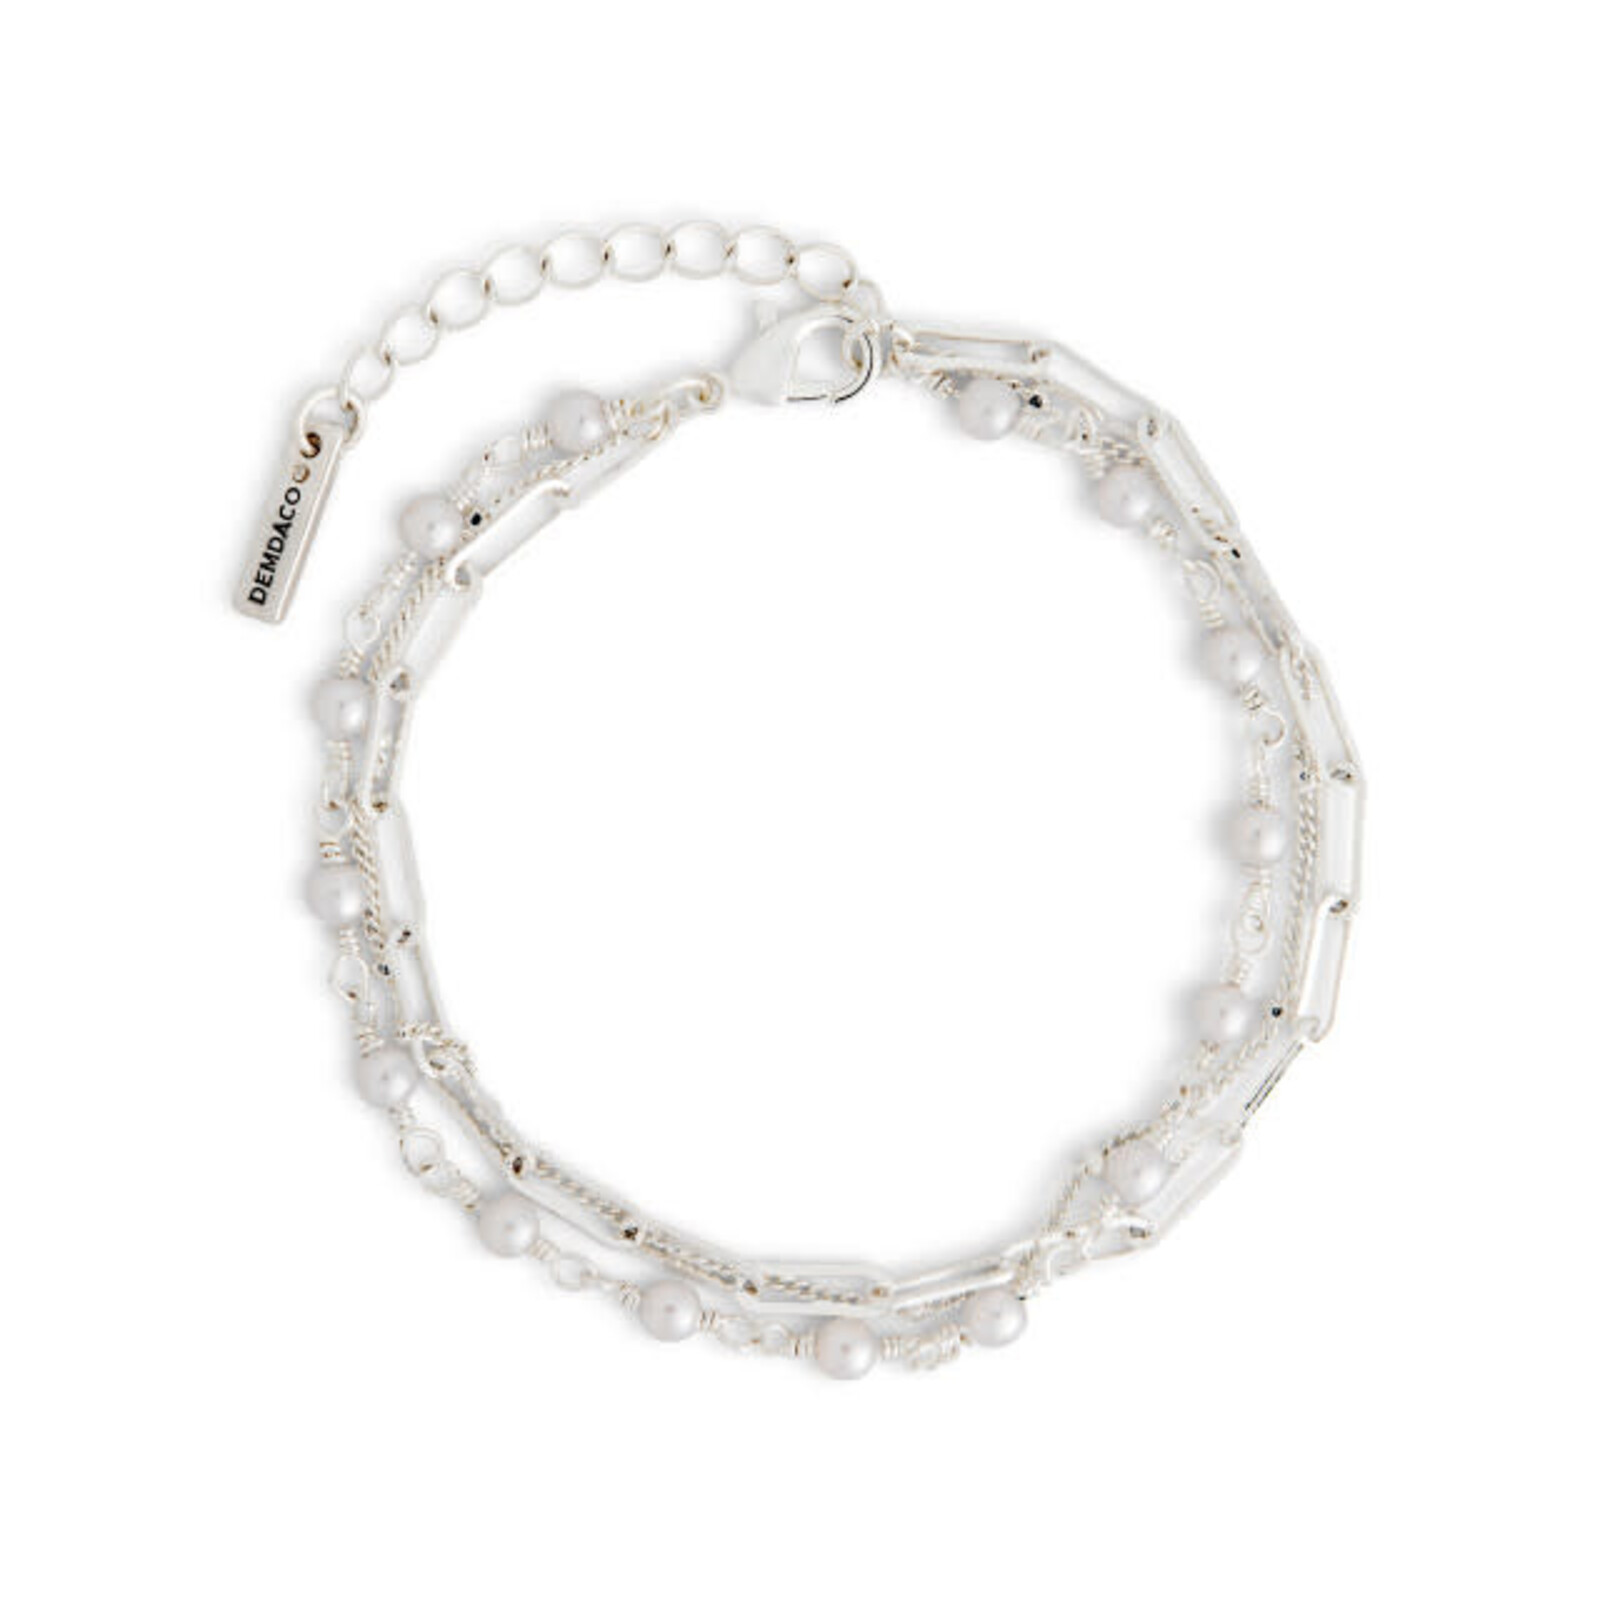 Demdaco Pearls From Within Bracelet - Silver      1004130352 loading=